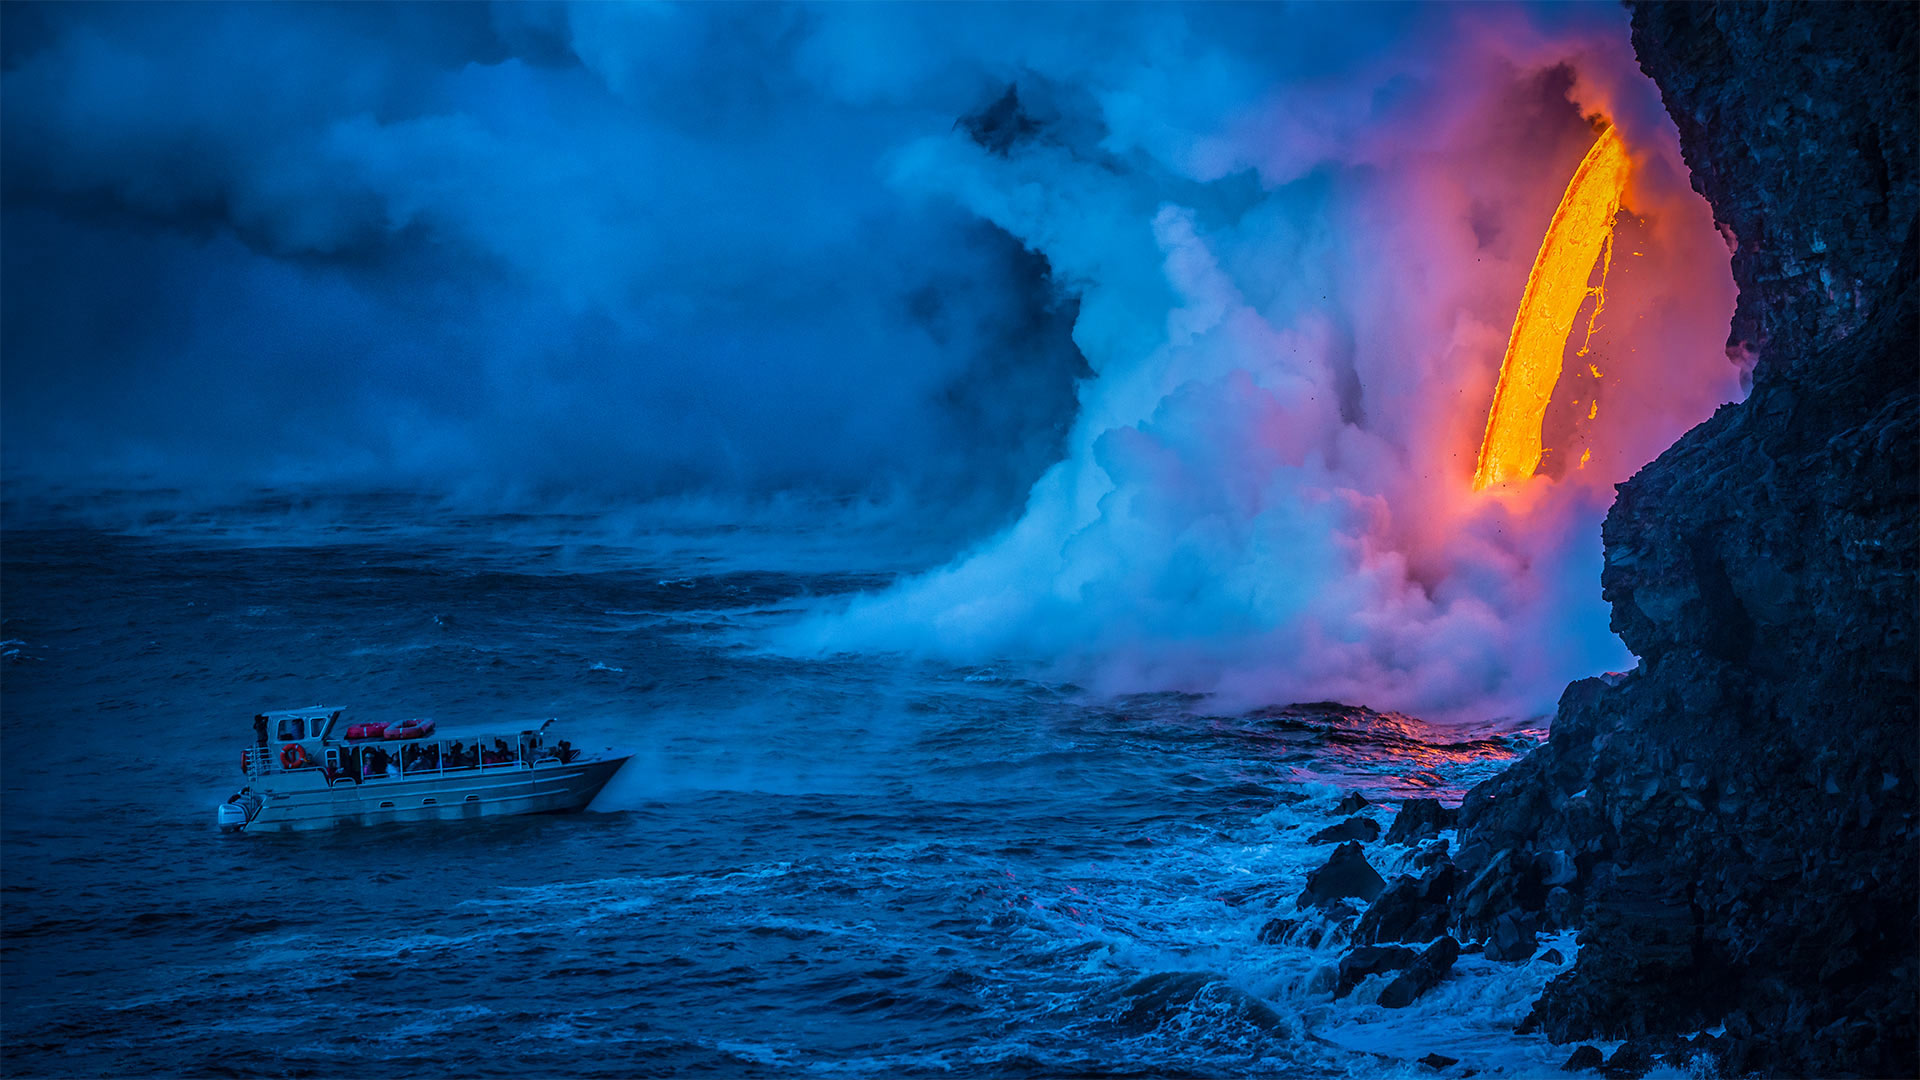 A lava flow hits water as a tour boat passes, Hawaii Volcanoes National Park - Patrick Kelley/Getty Images)